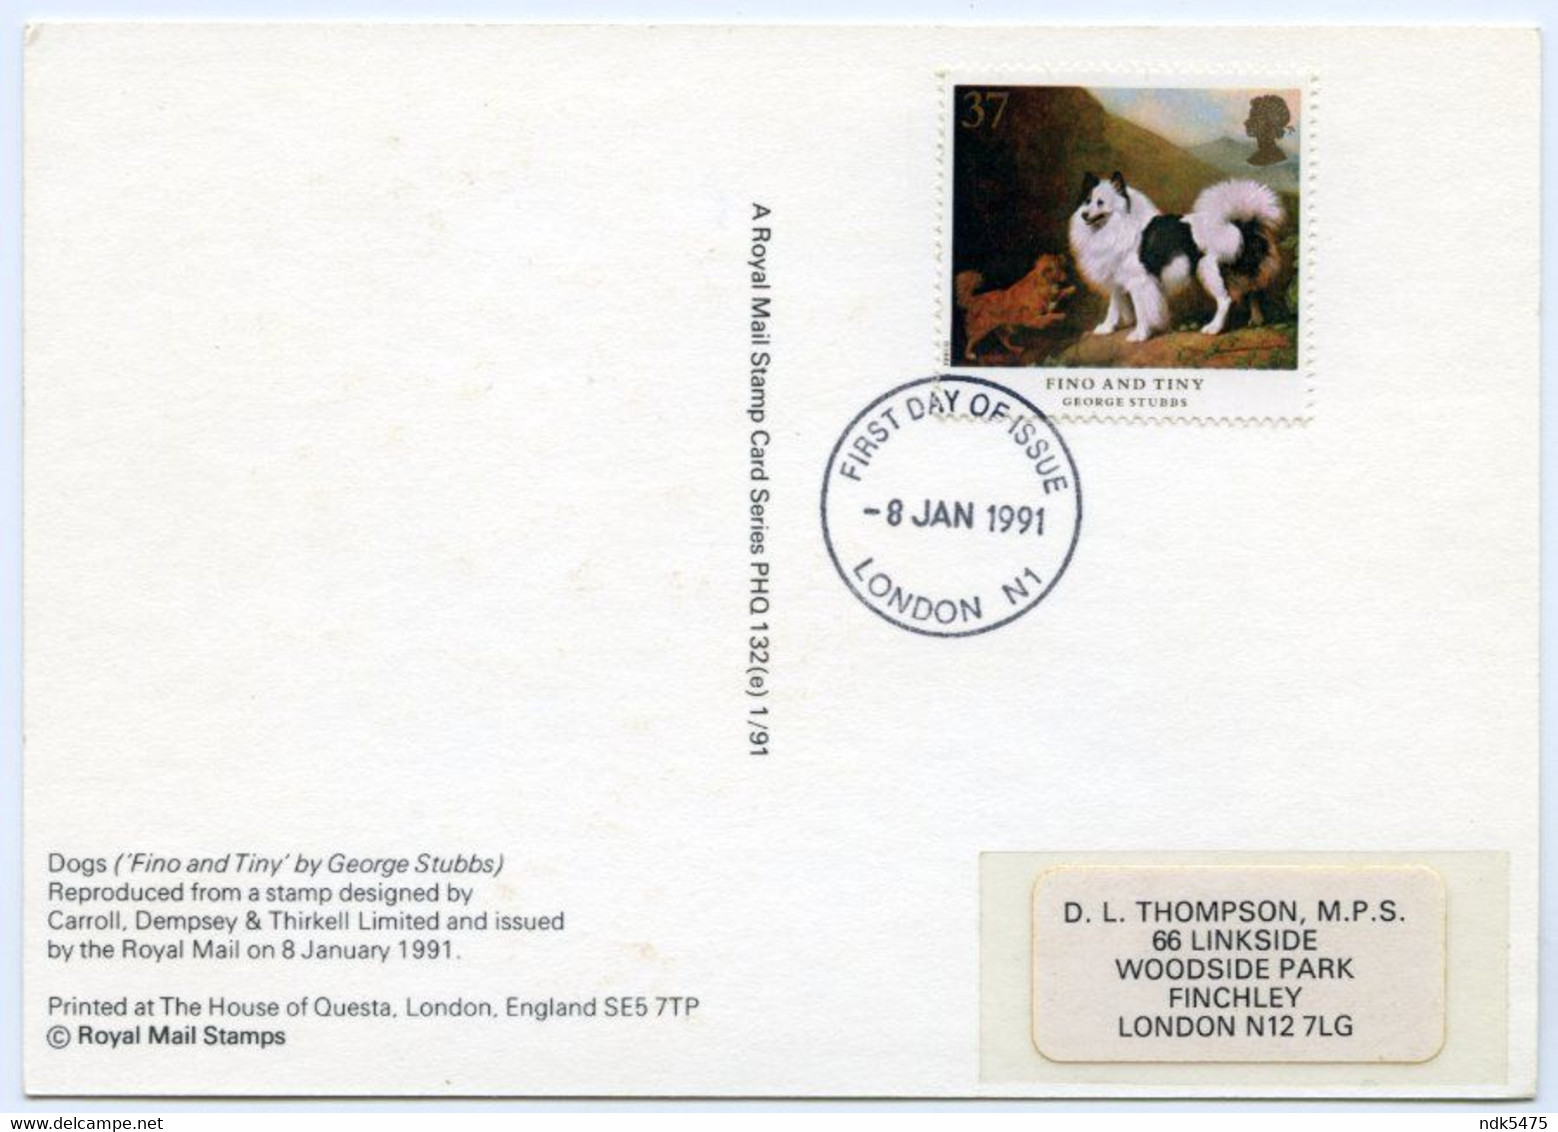 PHQ : GEORGE STUBBS - DOGS, FINO AND TINY, 1991 : FIRST DAY OF ISSUE, LONDON N1, FINCHLEY (10 X 15cms Approx.) - Carte PHQ